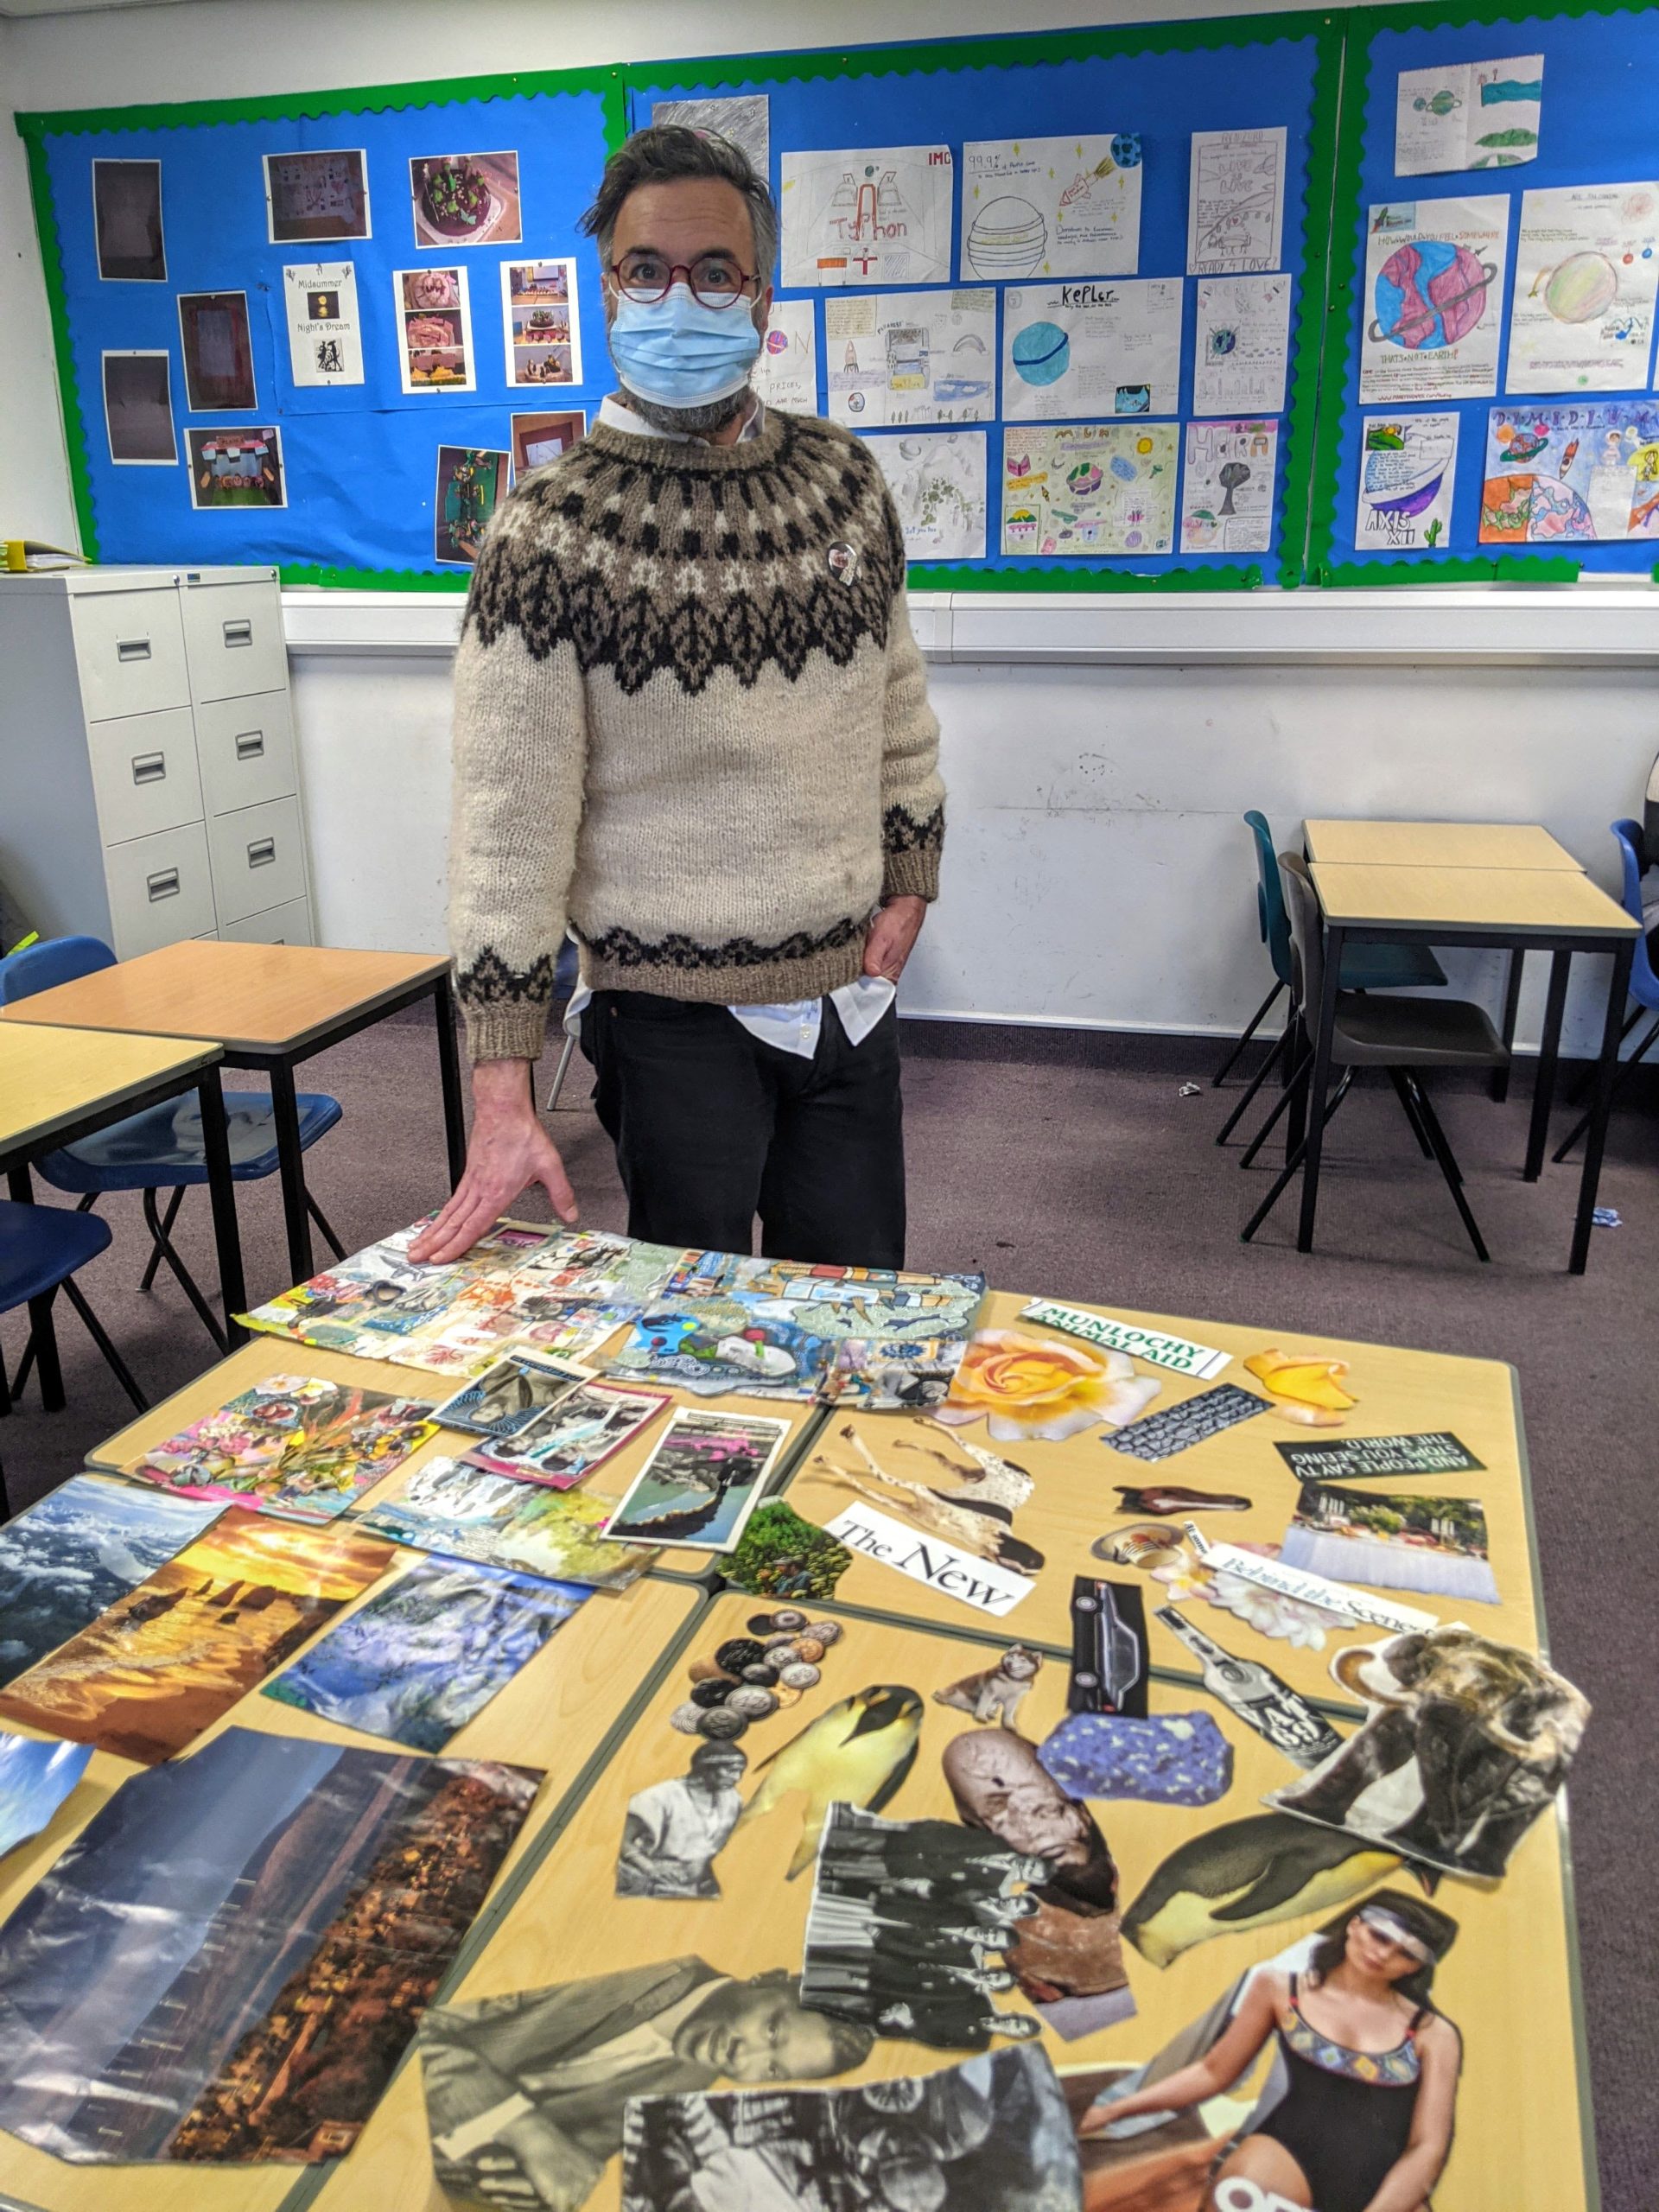 Ryan standing by a table of collaged images